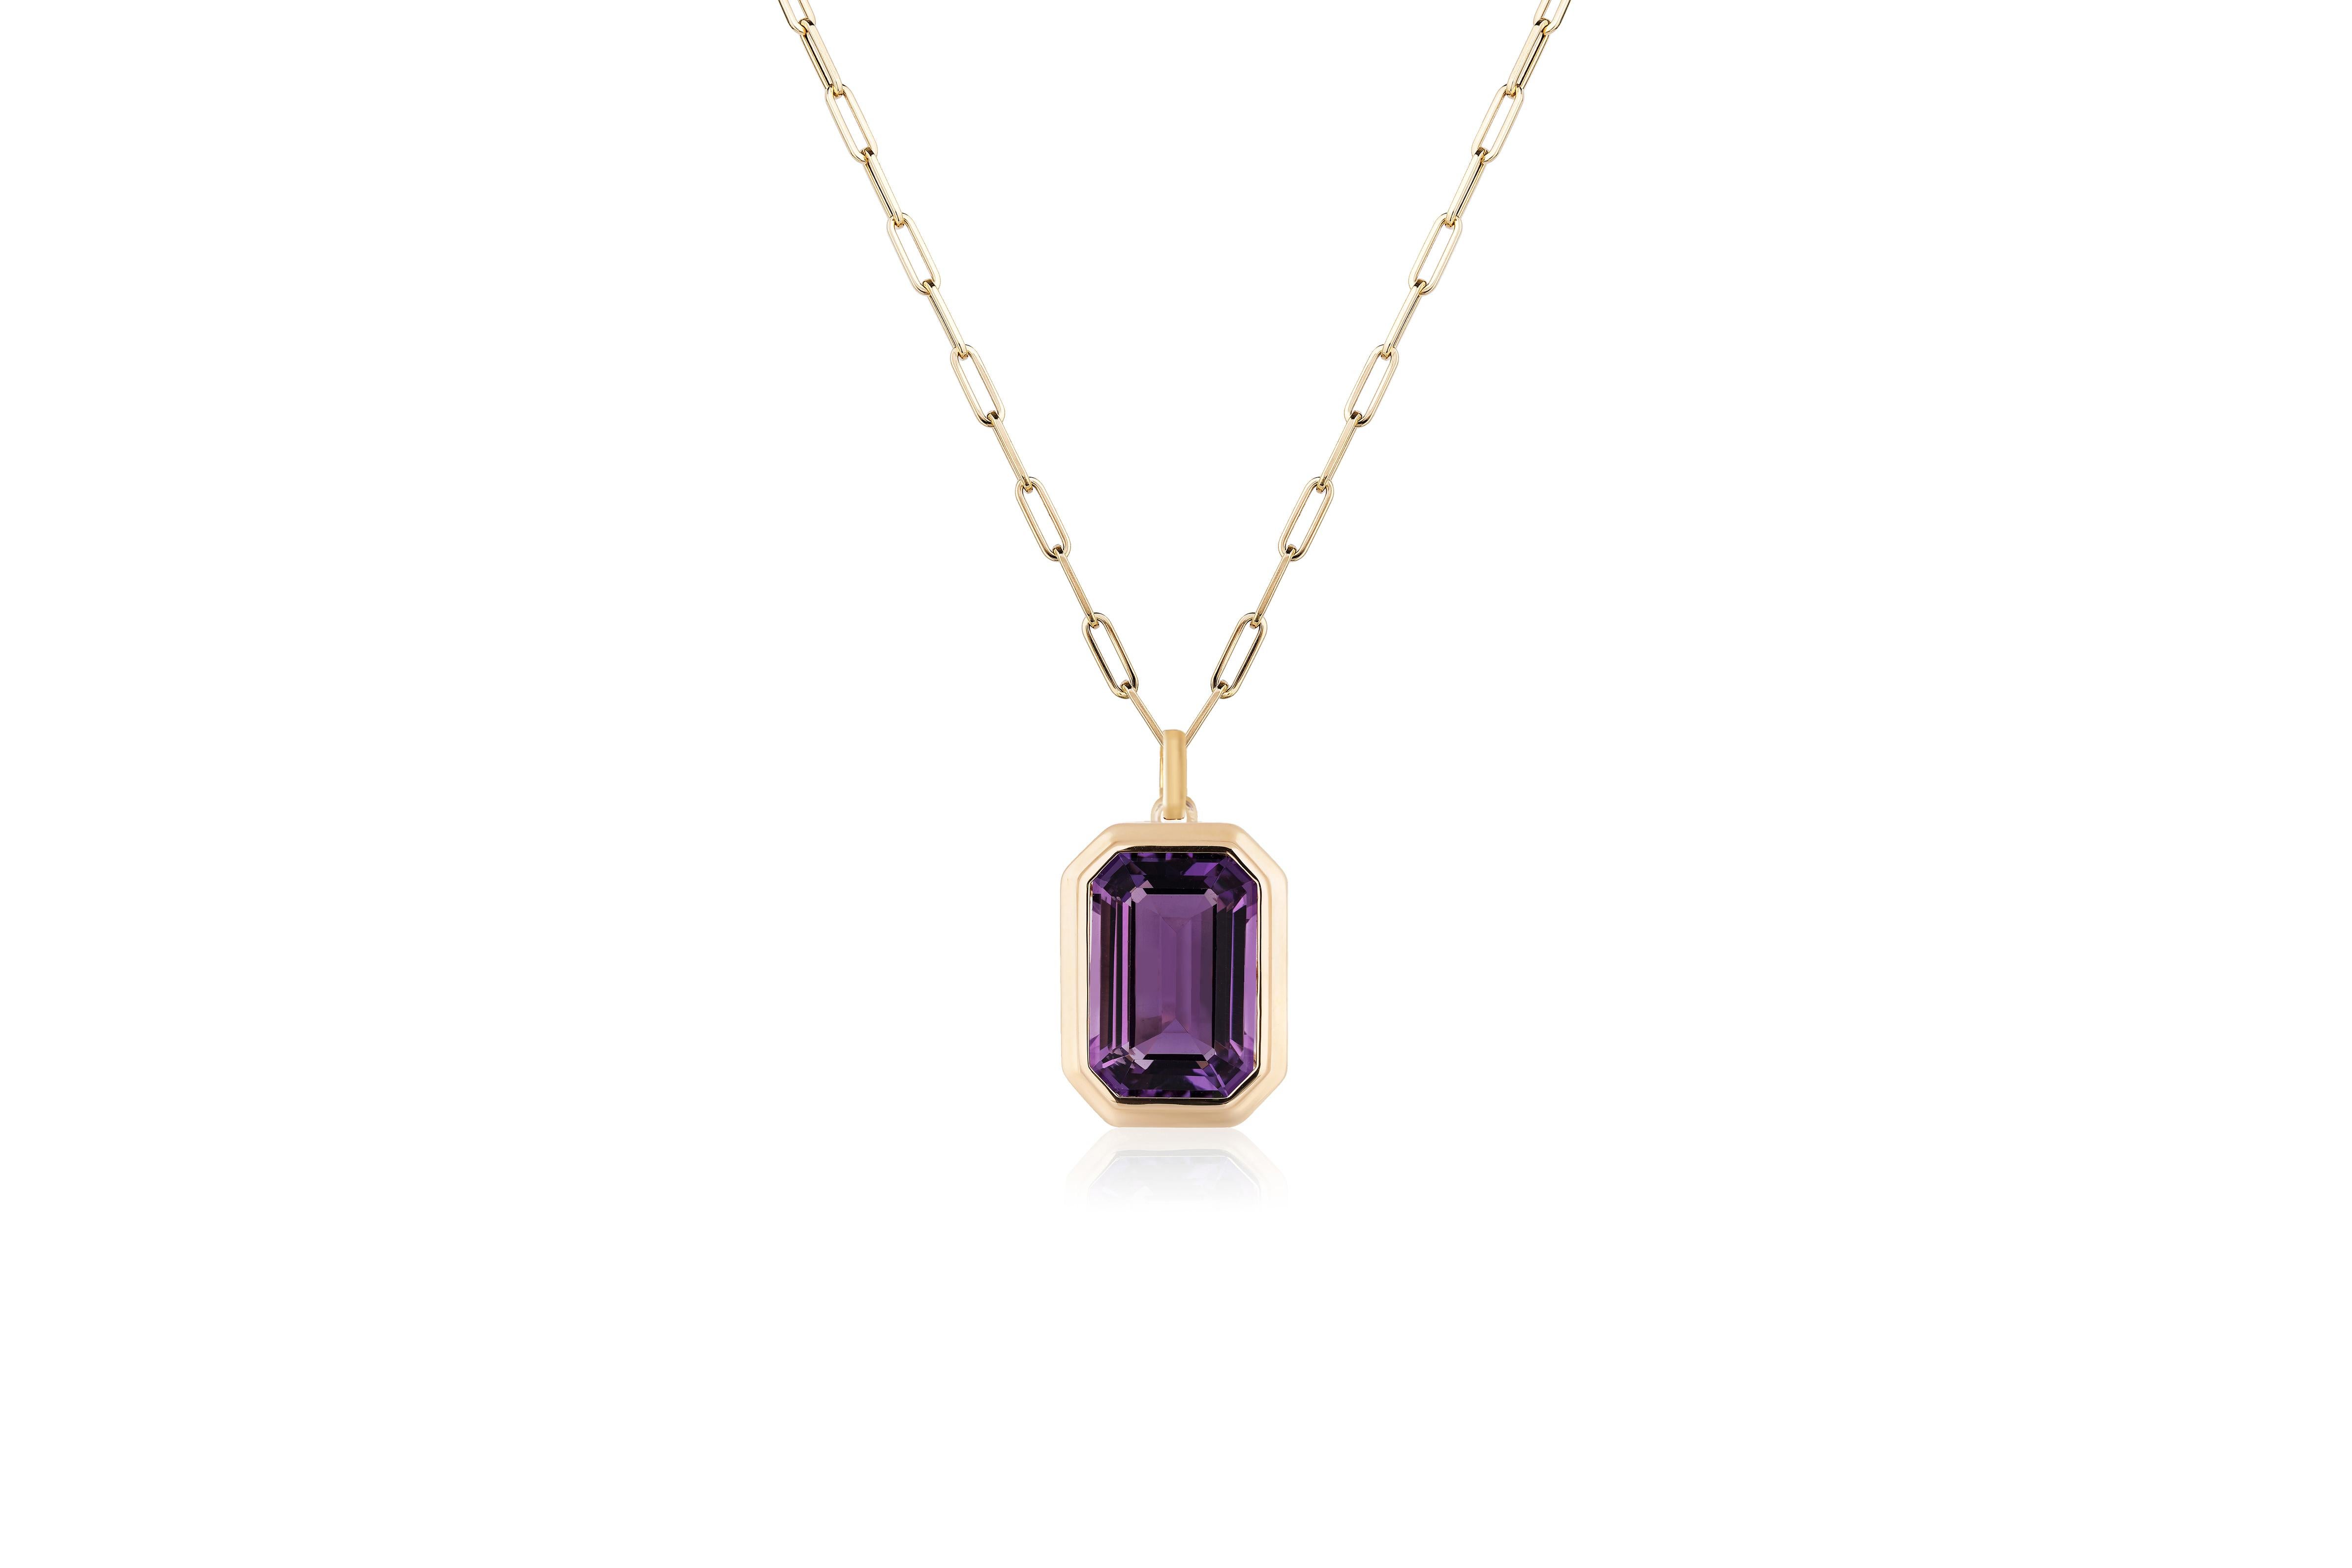 This beautiful Amethyst Emerald Cut Bezel Set Pendant in 18K Yellow Gold is from our ‘Manhattan’ Collection. Minimalist lines yet bold structures are what our Manhattan Collection is all about. Our pieces represent the famous skyline and cityscapes